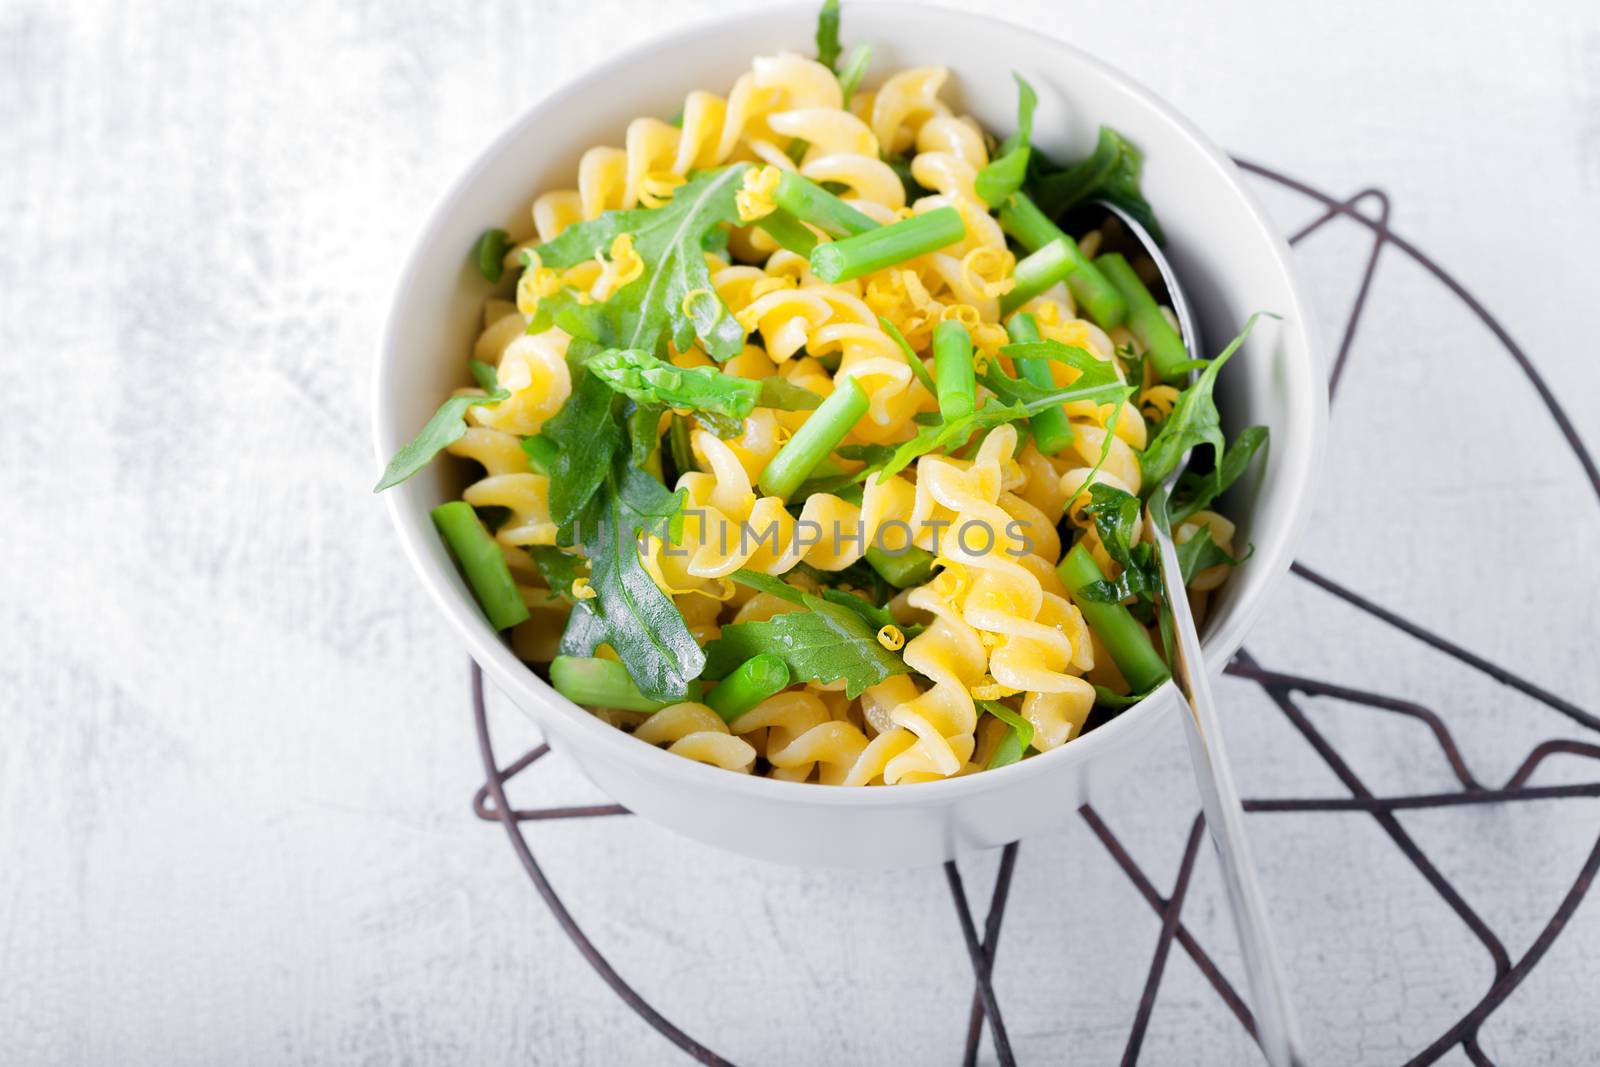 Pasta salad with asparagus and arugula by supercat67